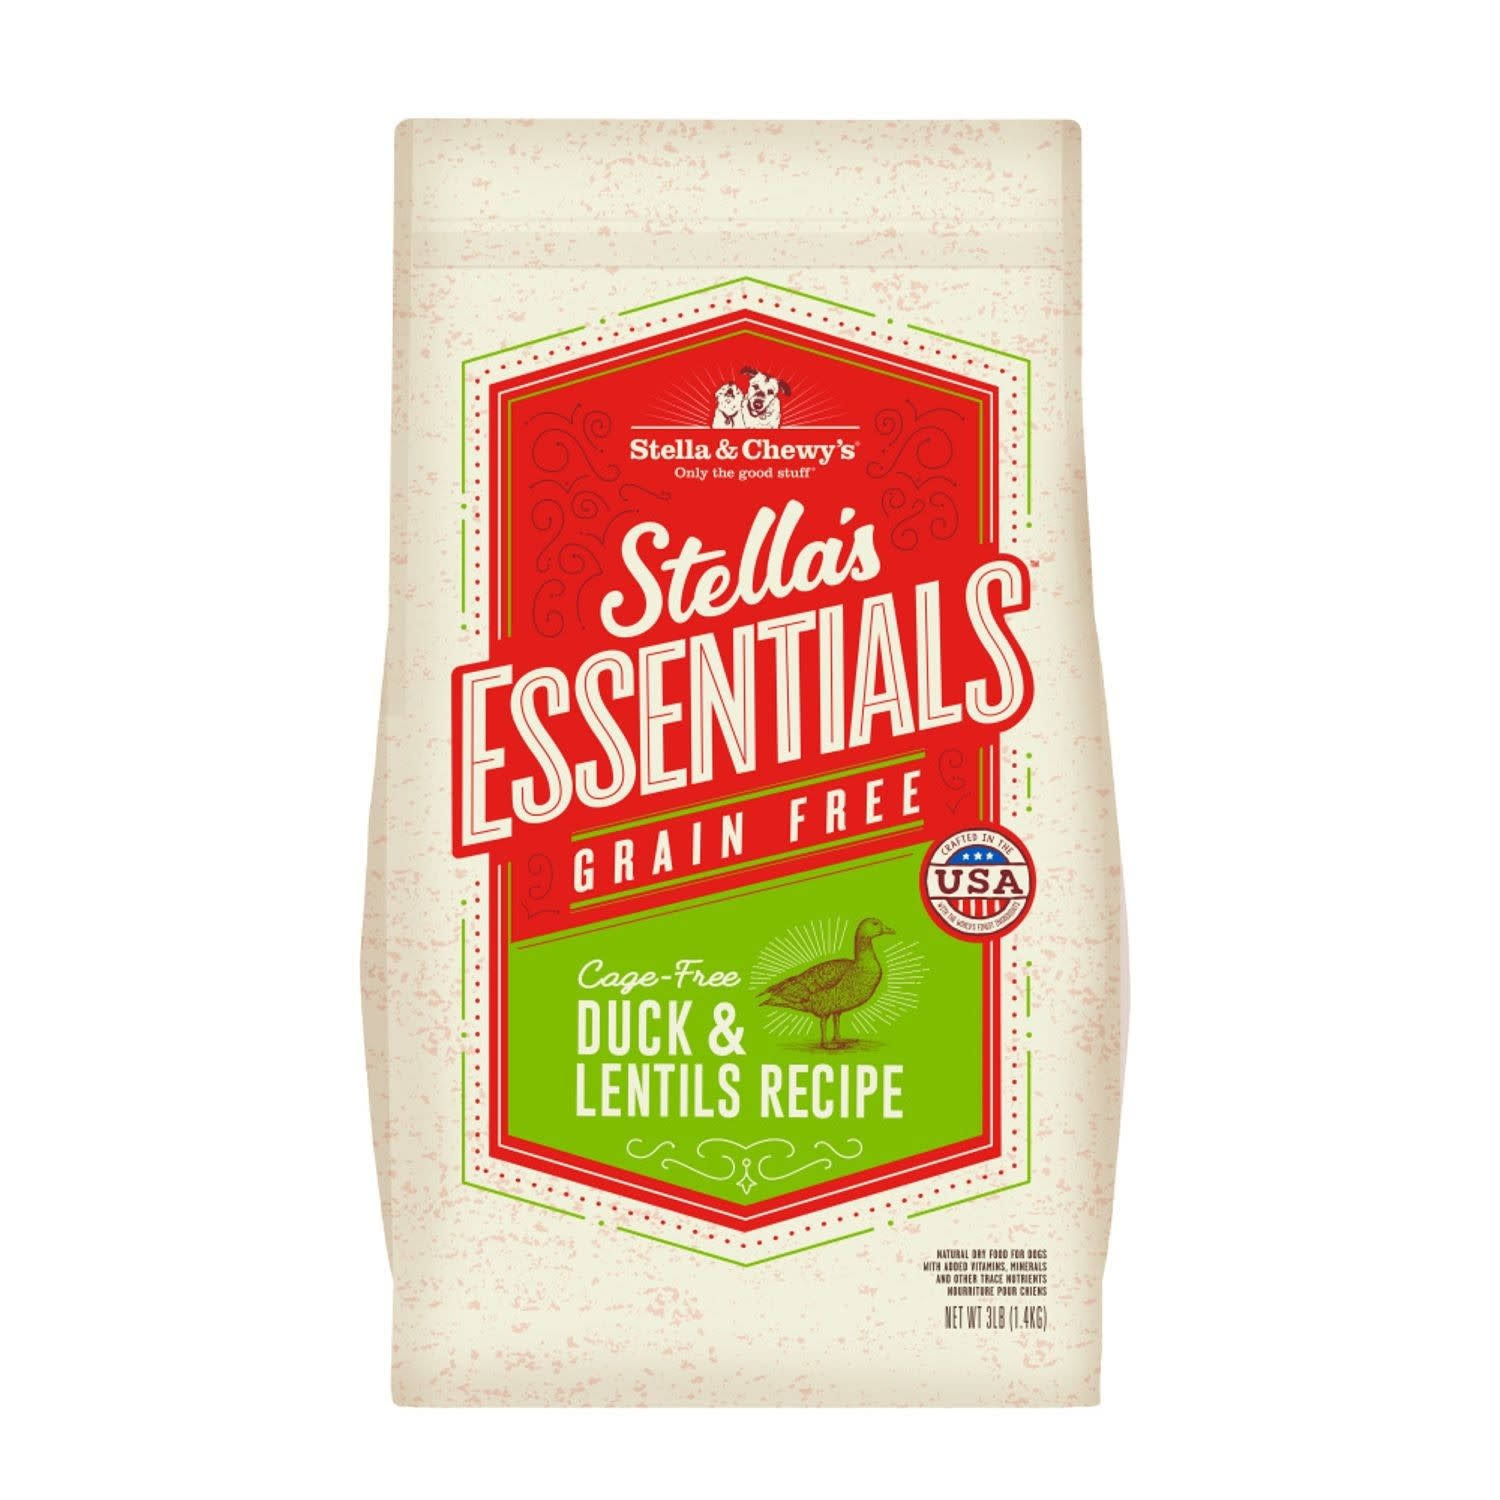 Stella & Chewy's Essentials Grain-Free Cage-Free Duck & Lentils Recipe Dog Food - 25-Lbs.